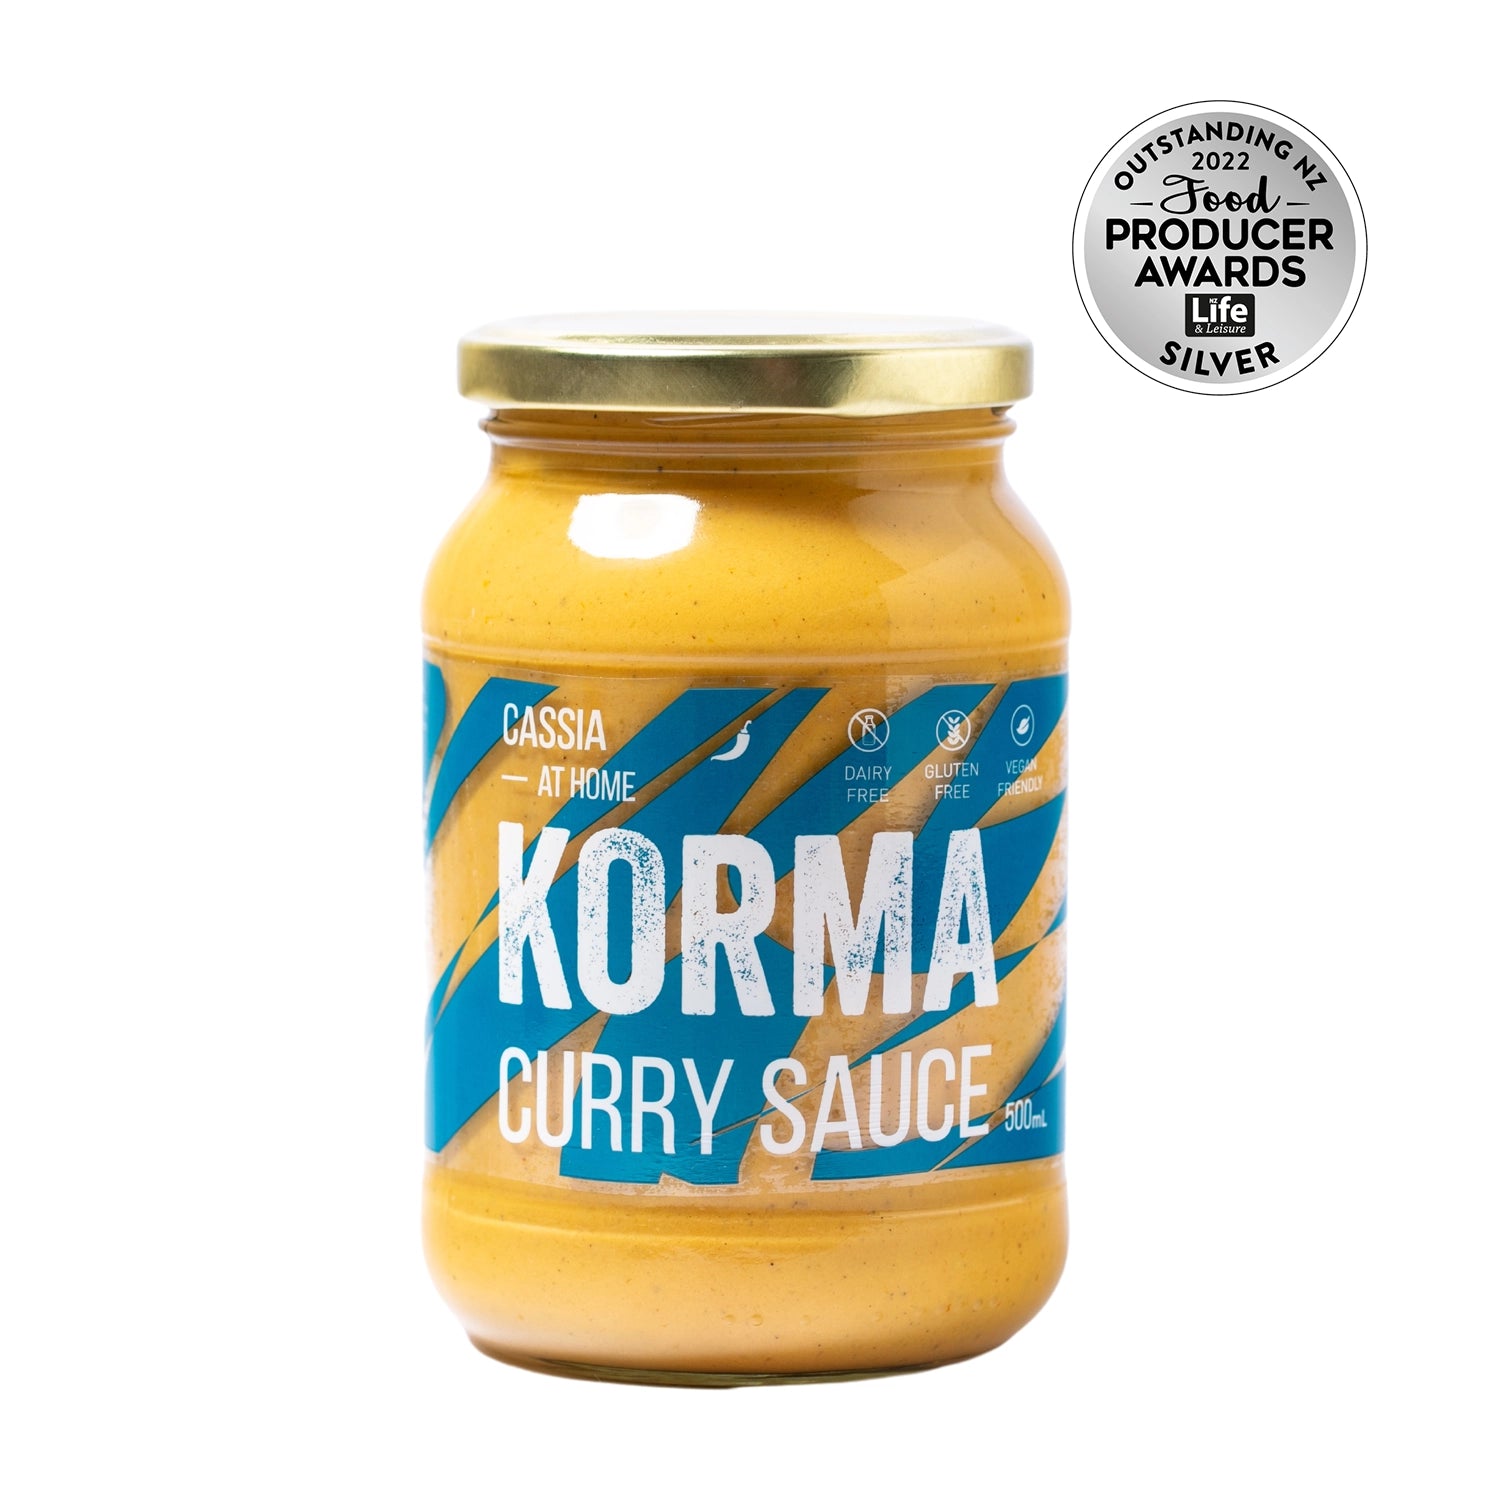 Korma Curry Sauce Cassia At Home Silver Food Producer Awards 2022